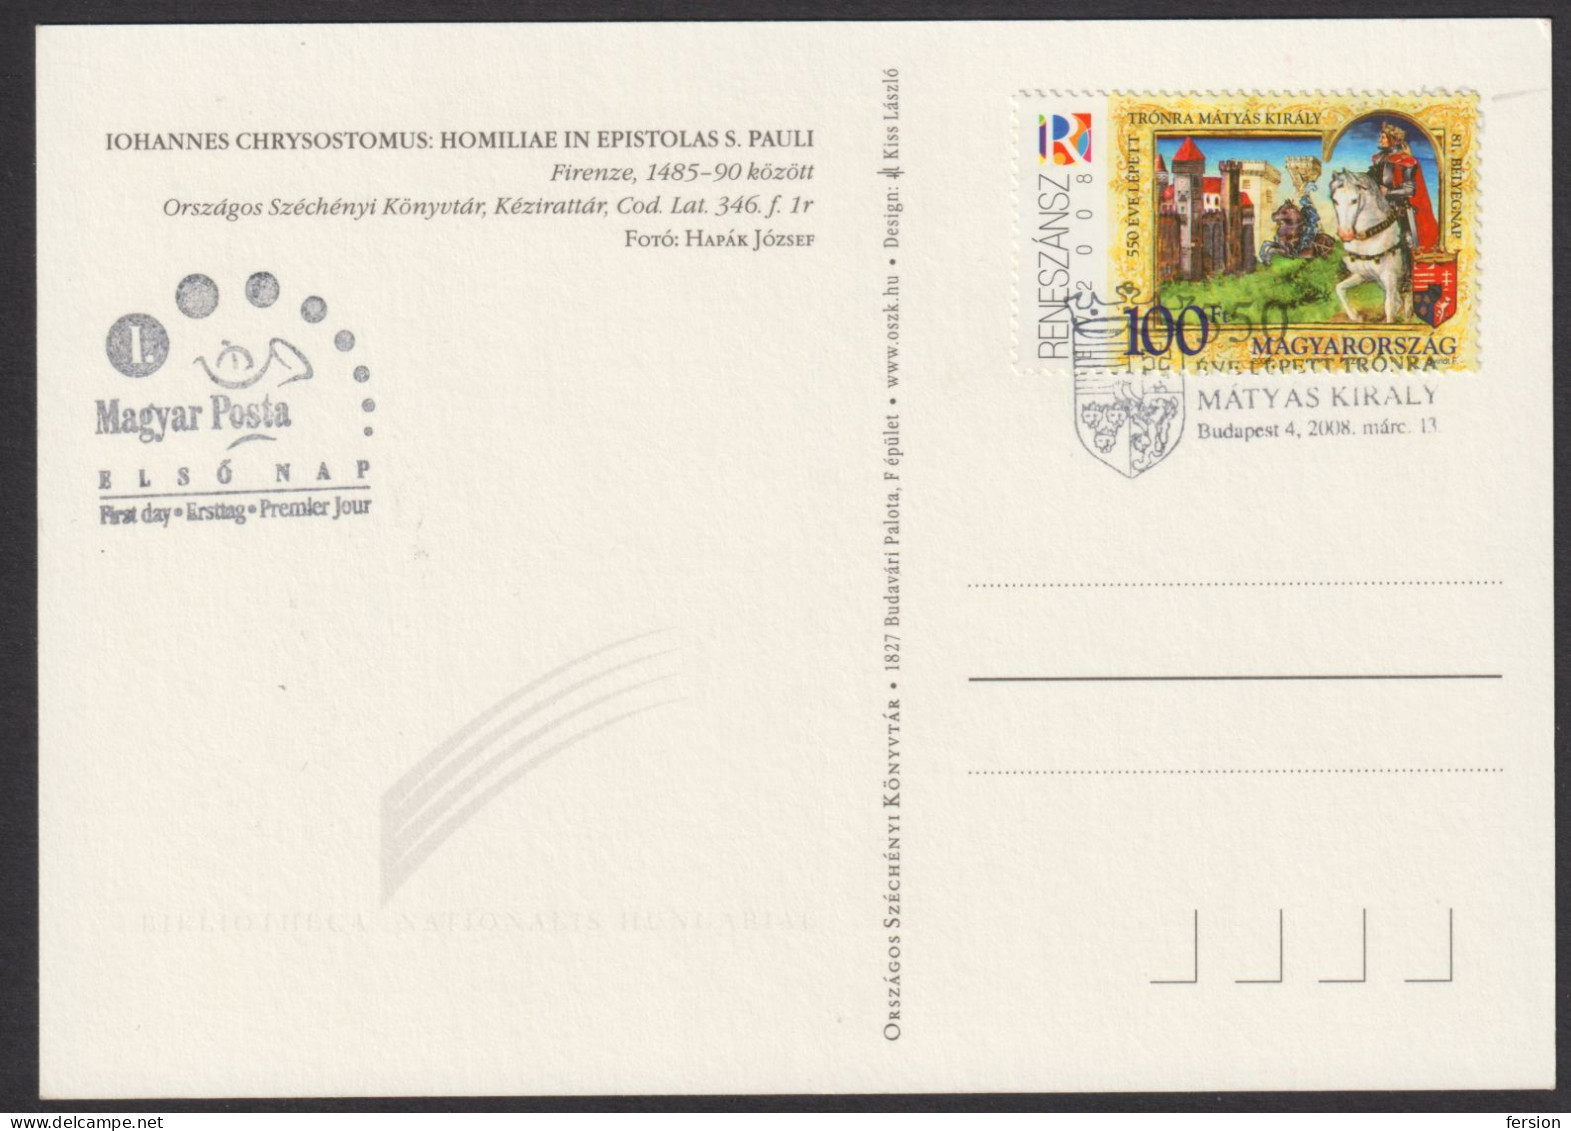 KING Matthias CORONATION Renaissance ART Year HORSE CASTLE 81 Stamp Day 2008 Hungary LIBRARY BOOK Codex FDC POSTCARD - Lettres & Documents